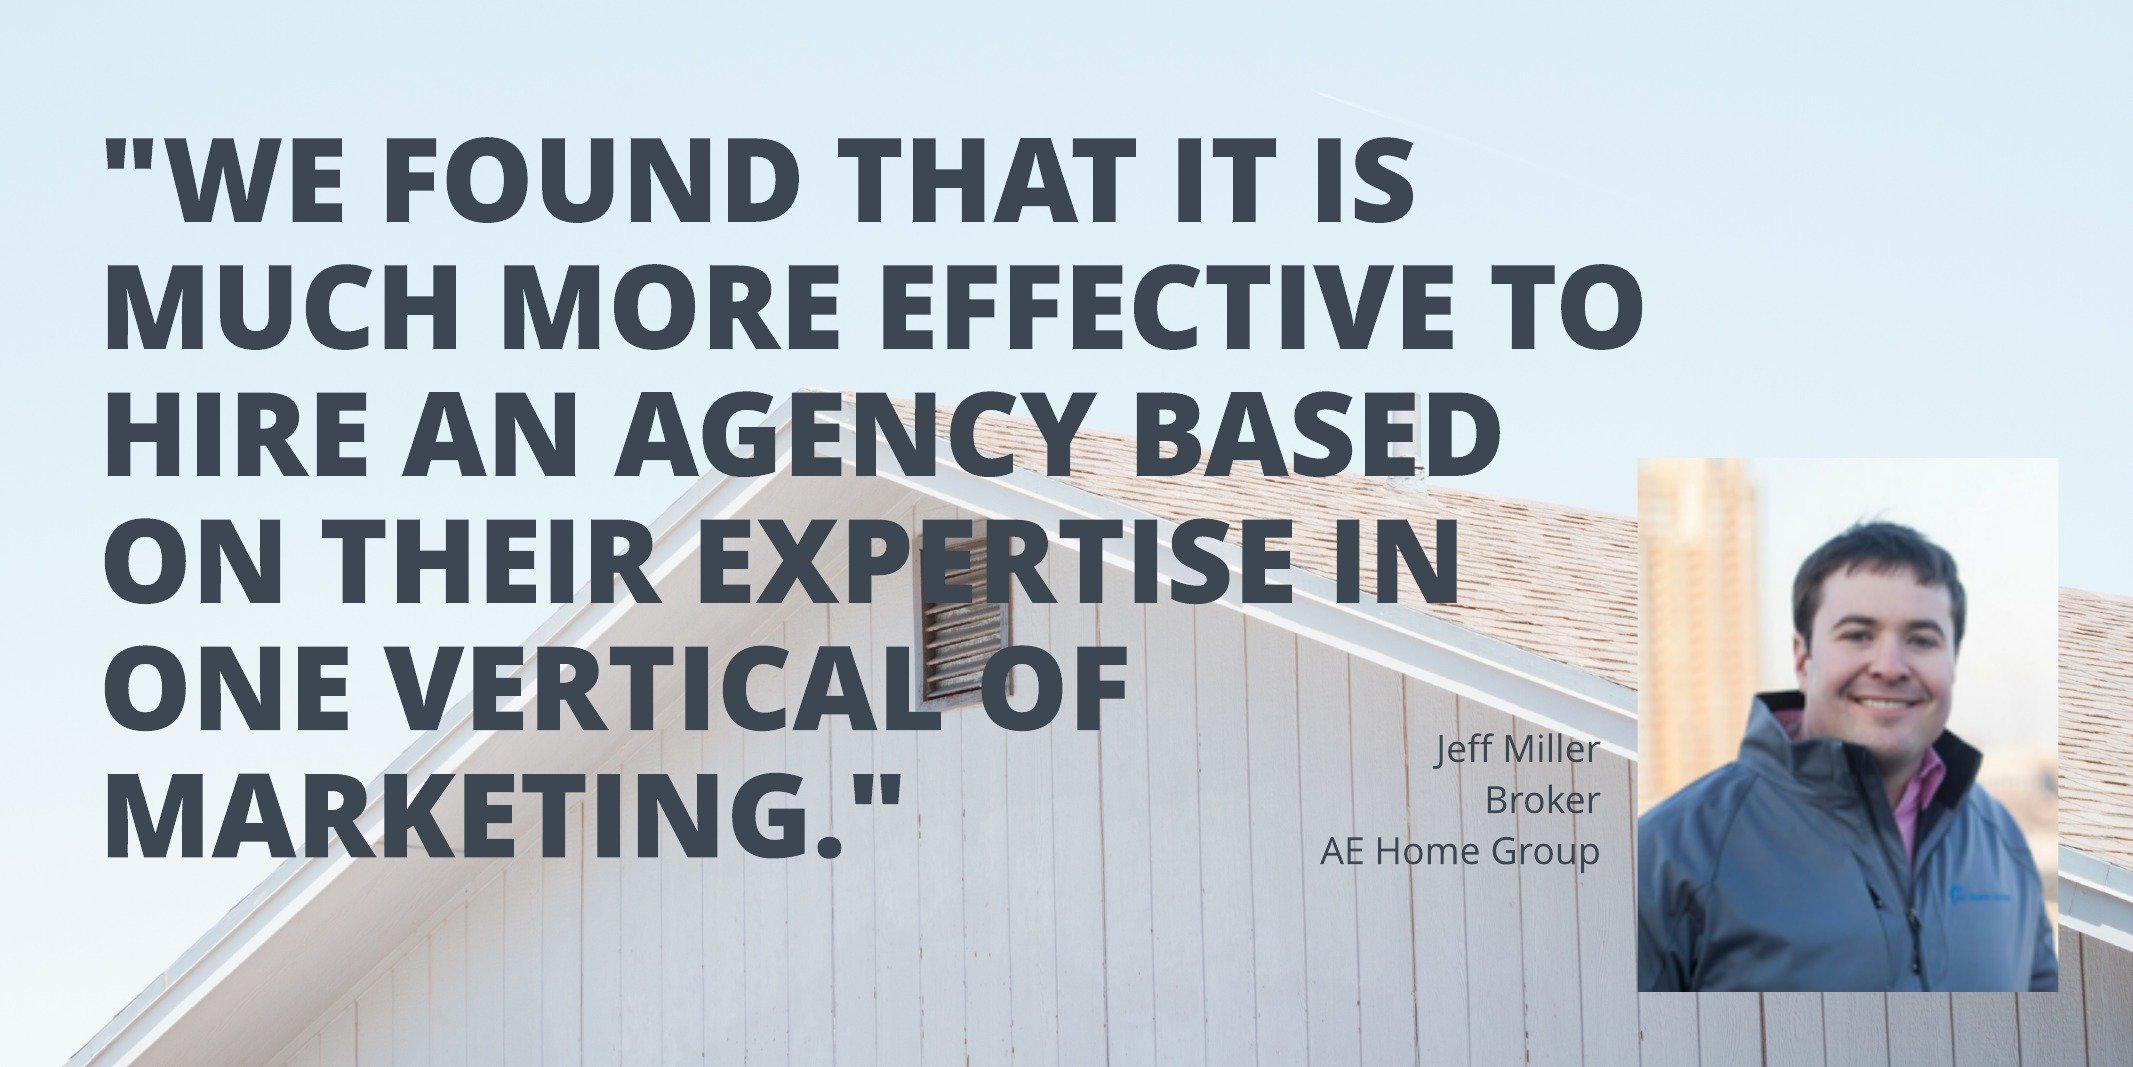 Is limited agency in real estate when the company is the same